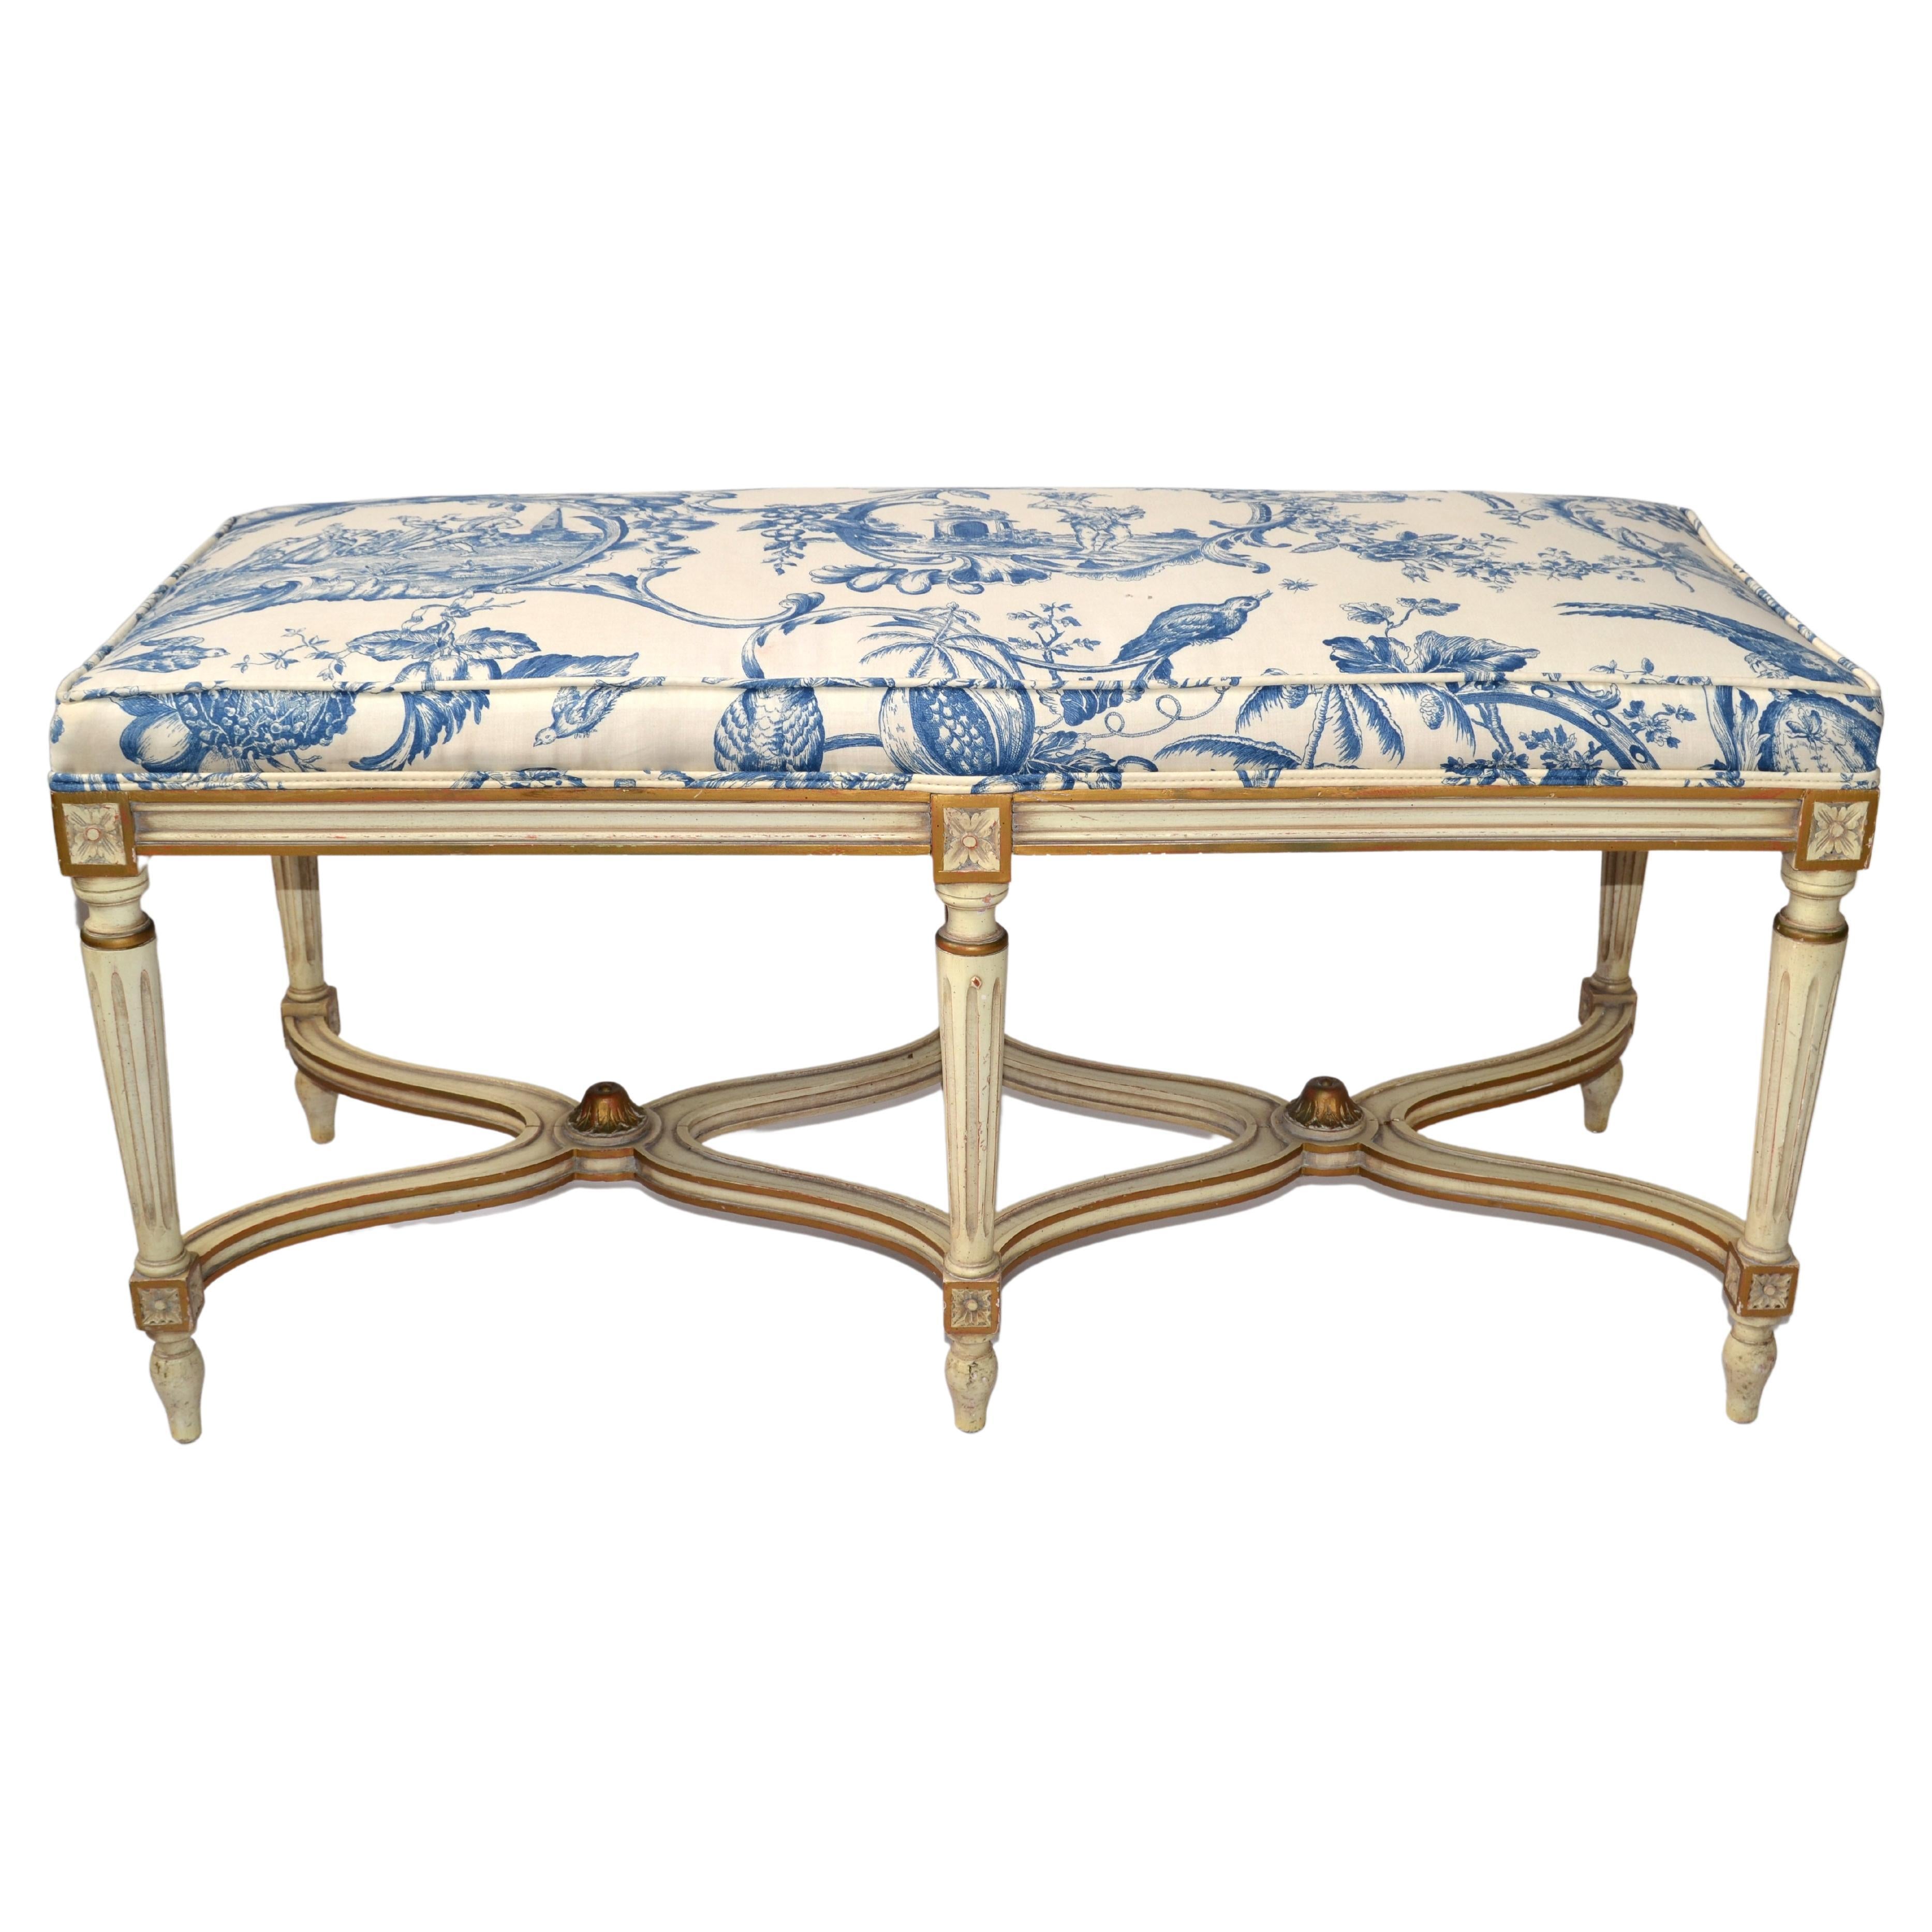 Louis XVI Bench Karges Furniture Co. Hand Carved Hardwood Blue Motif Fabric For Sale